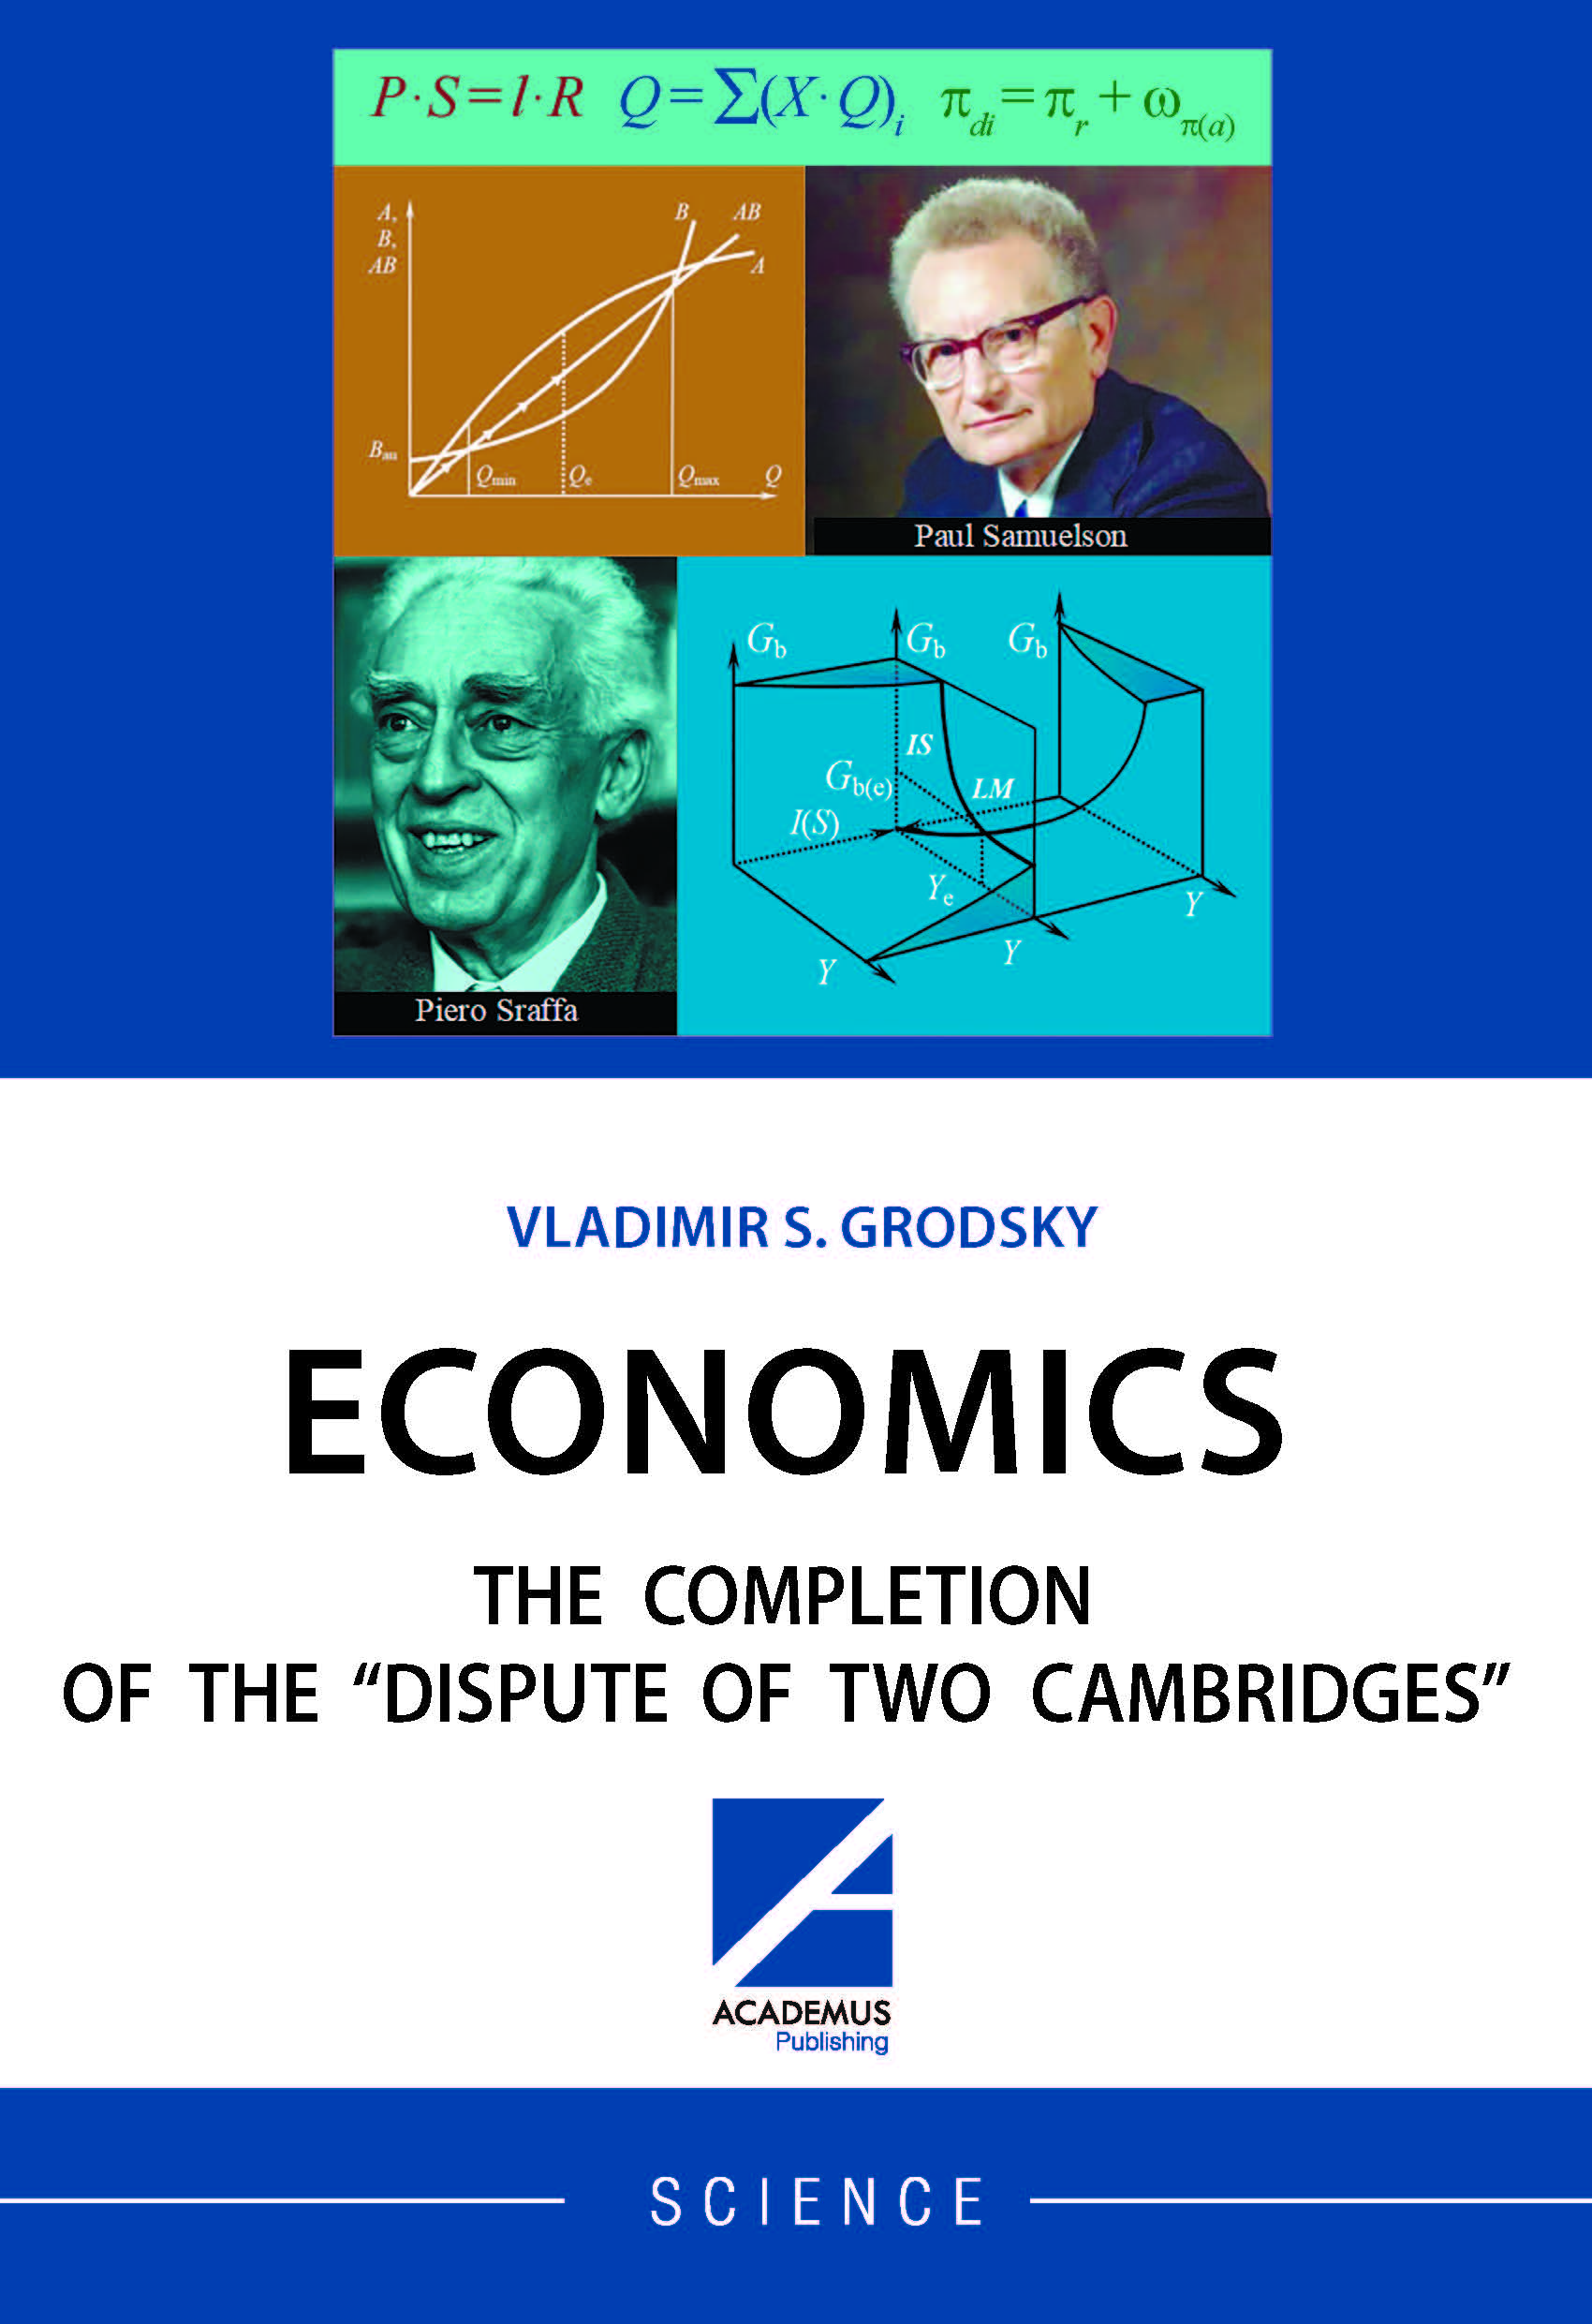             ECONOMICS THE COMPLETION OF THE “DISPUTE OF TWO CAMBRIDGES”
    